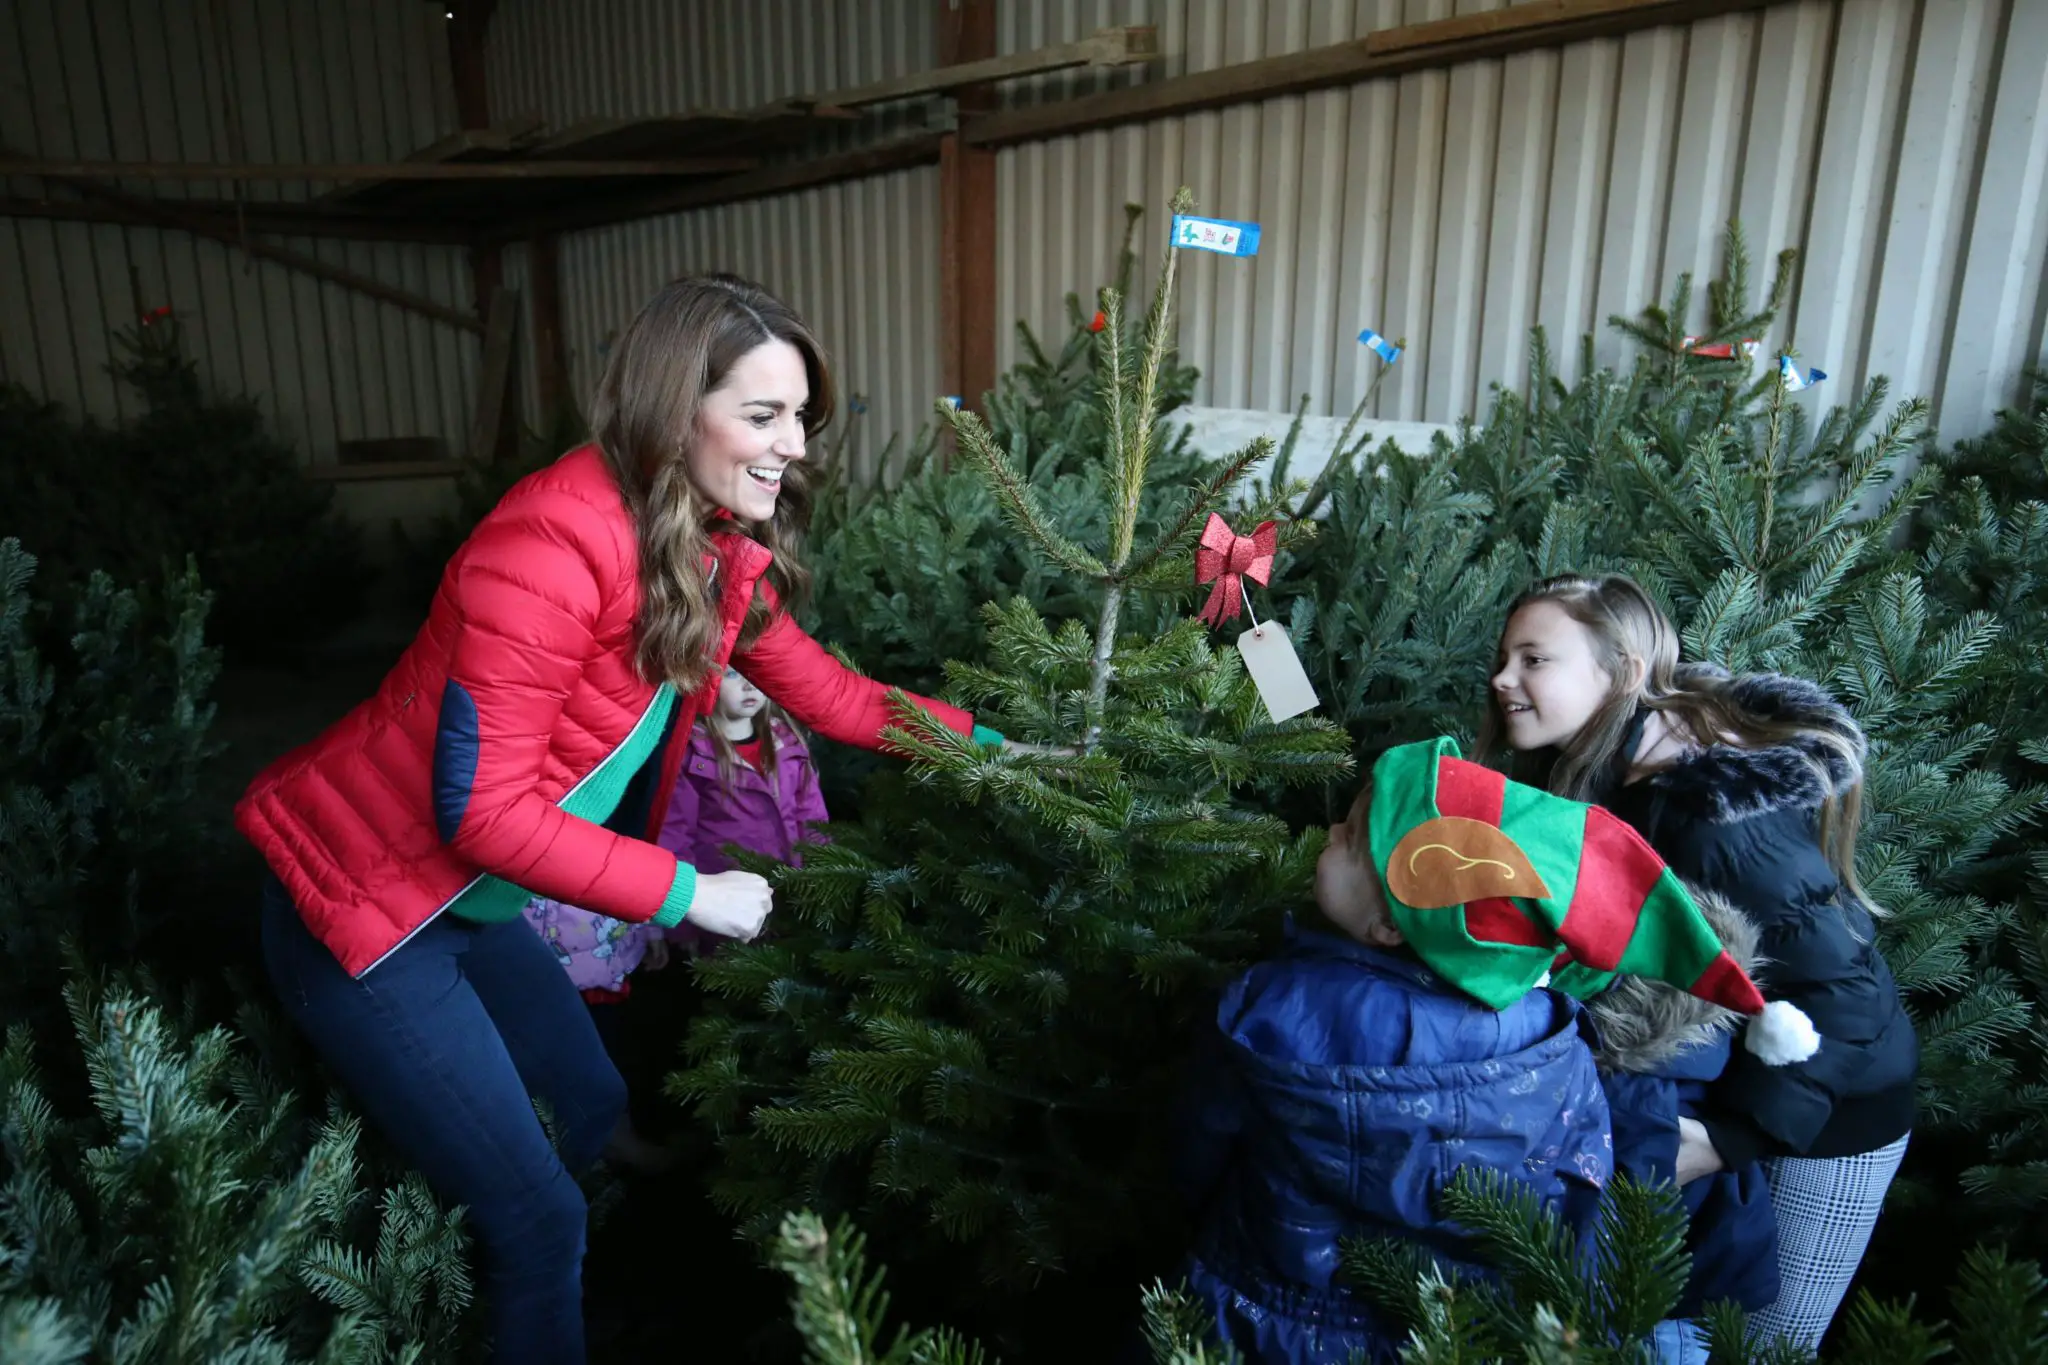 The Duchess of Cambridge helped children pick up Christmas tree during Family Action visit